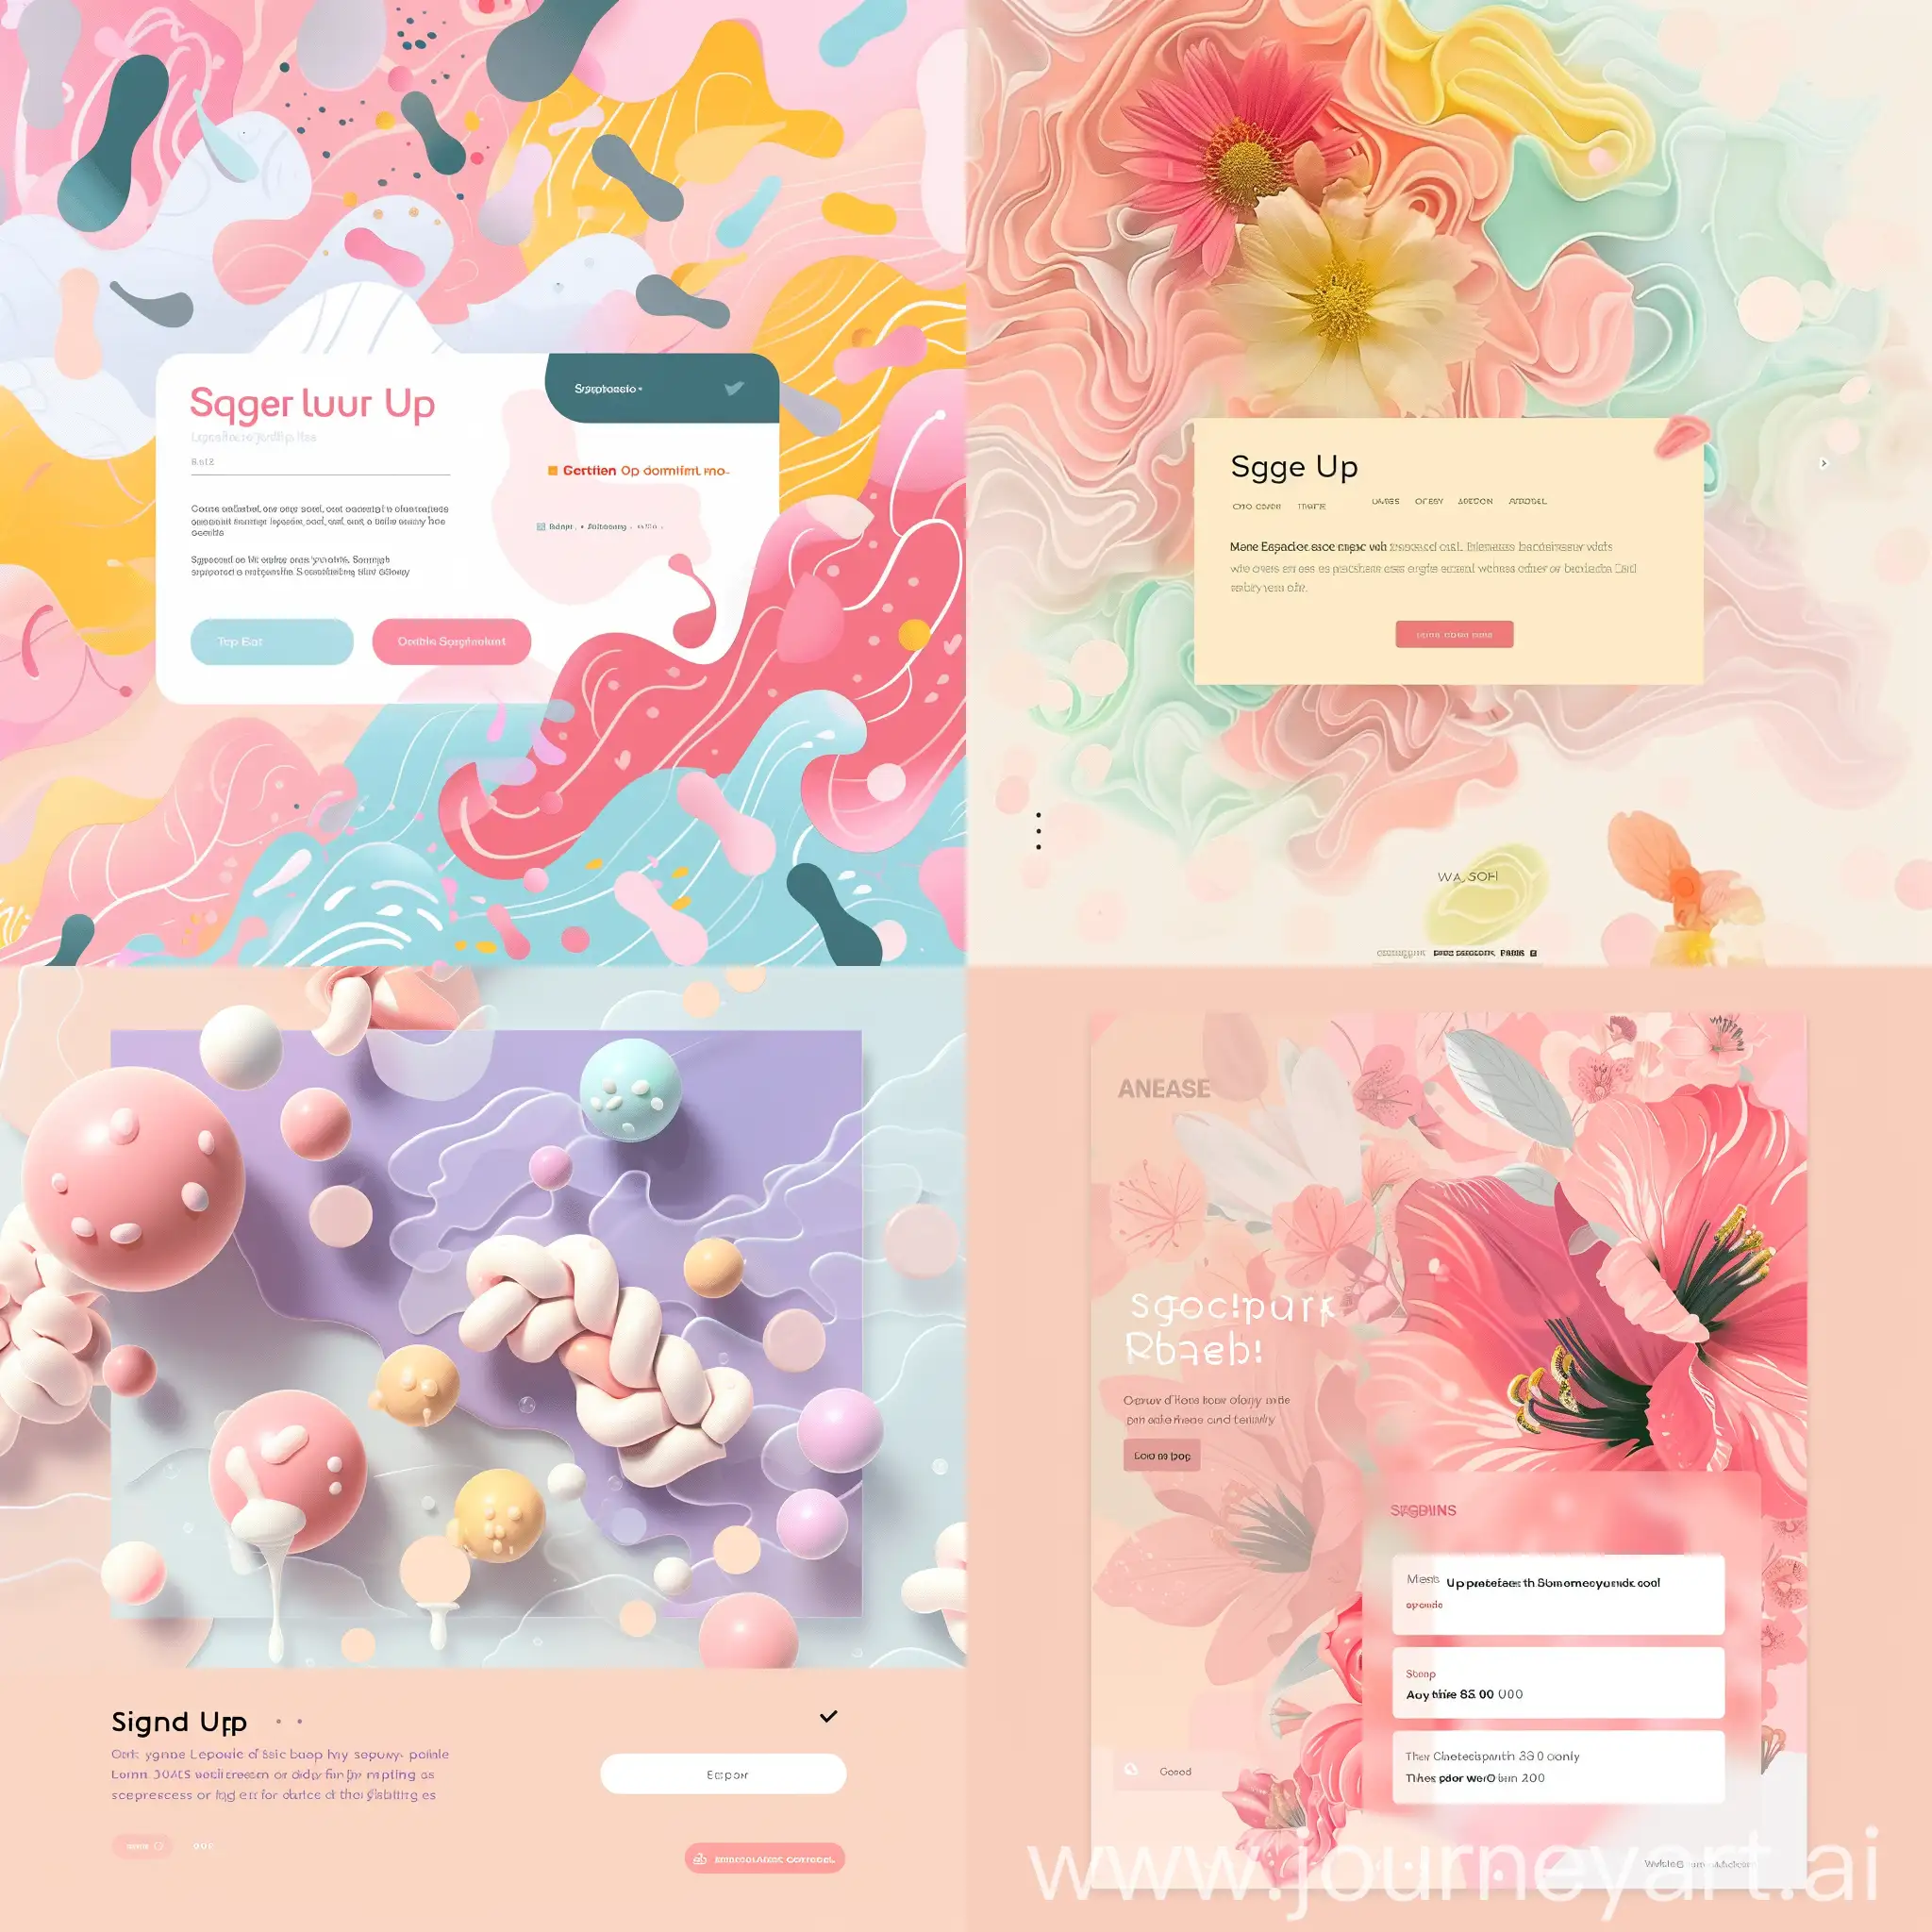 please generate a signup page with cool background image for ecommerce website and theme color should be the combination of pastel colors